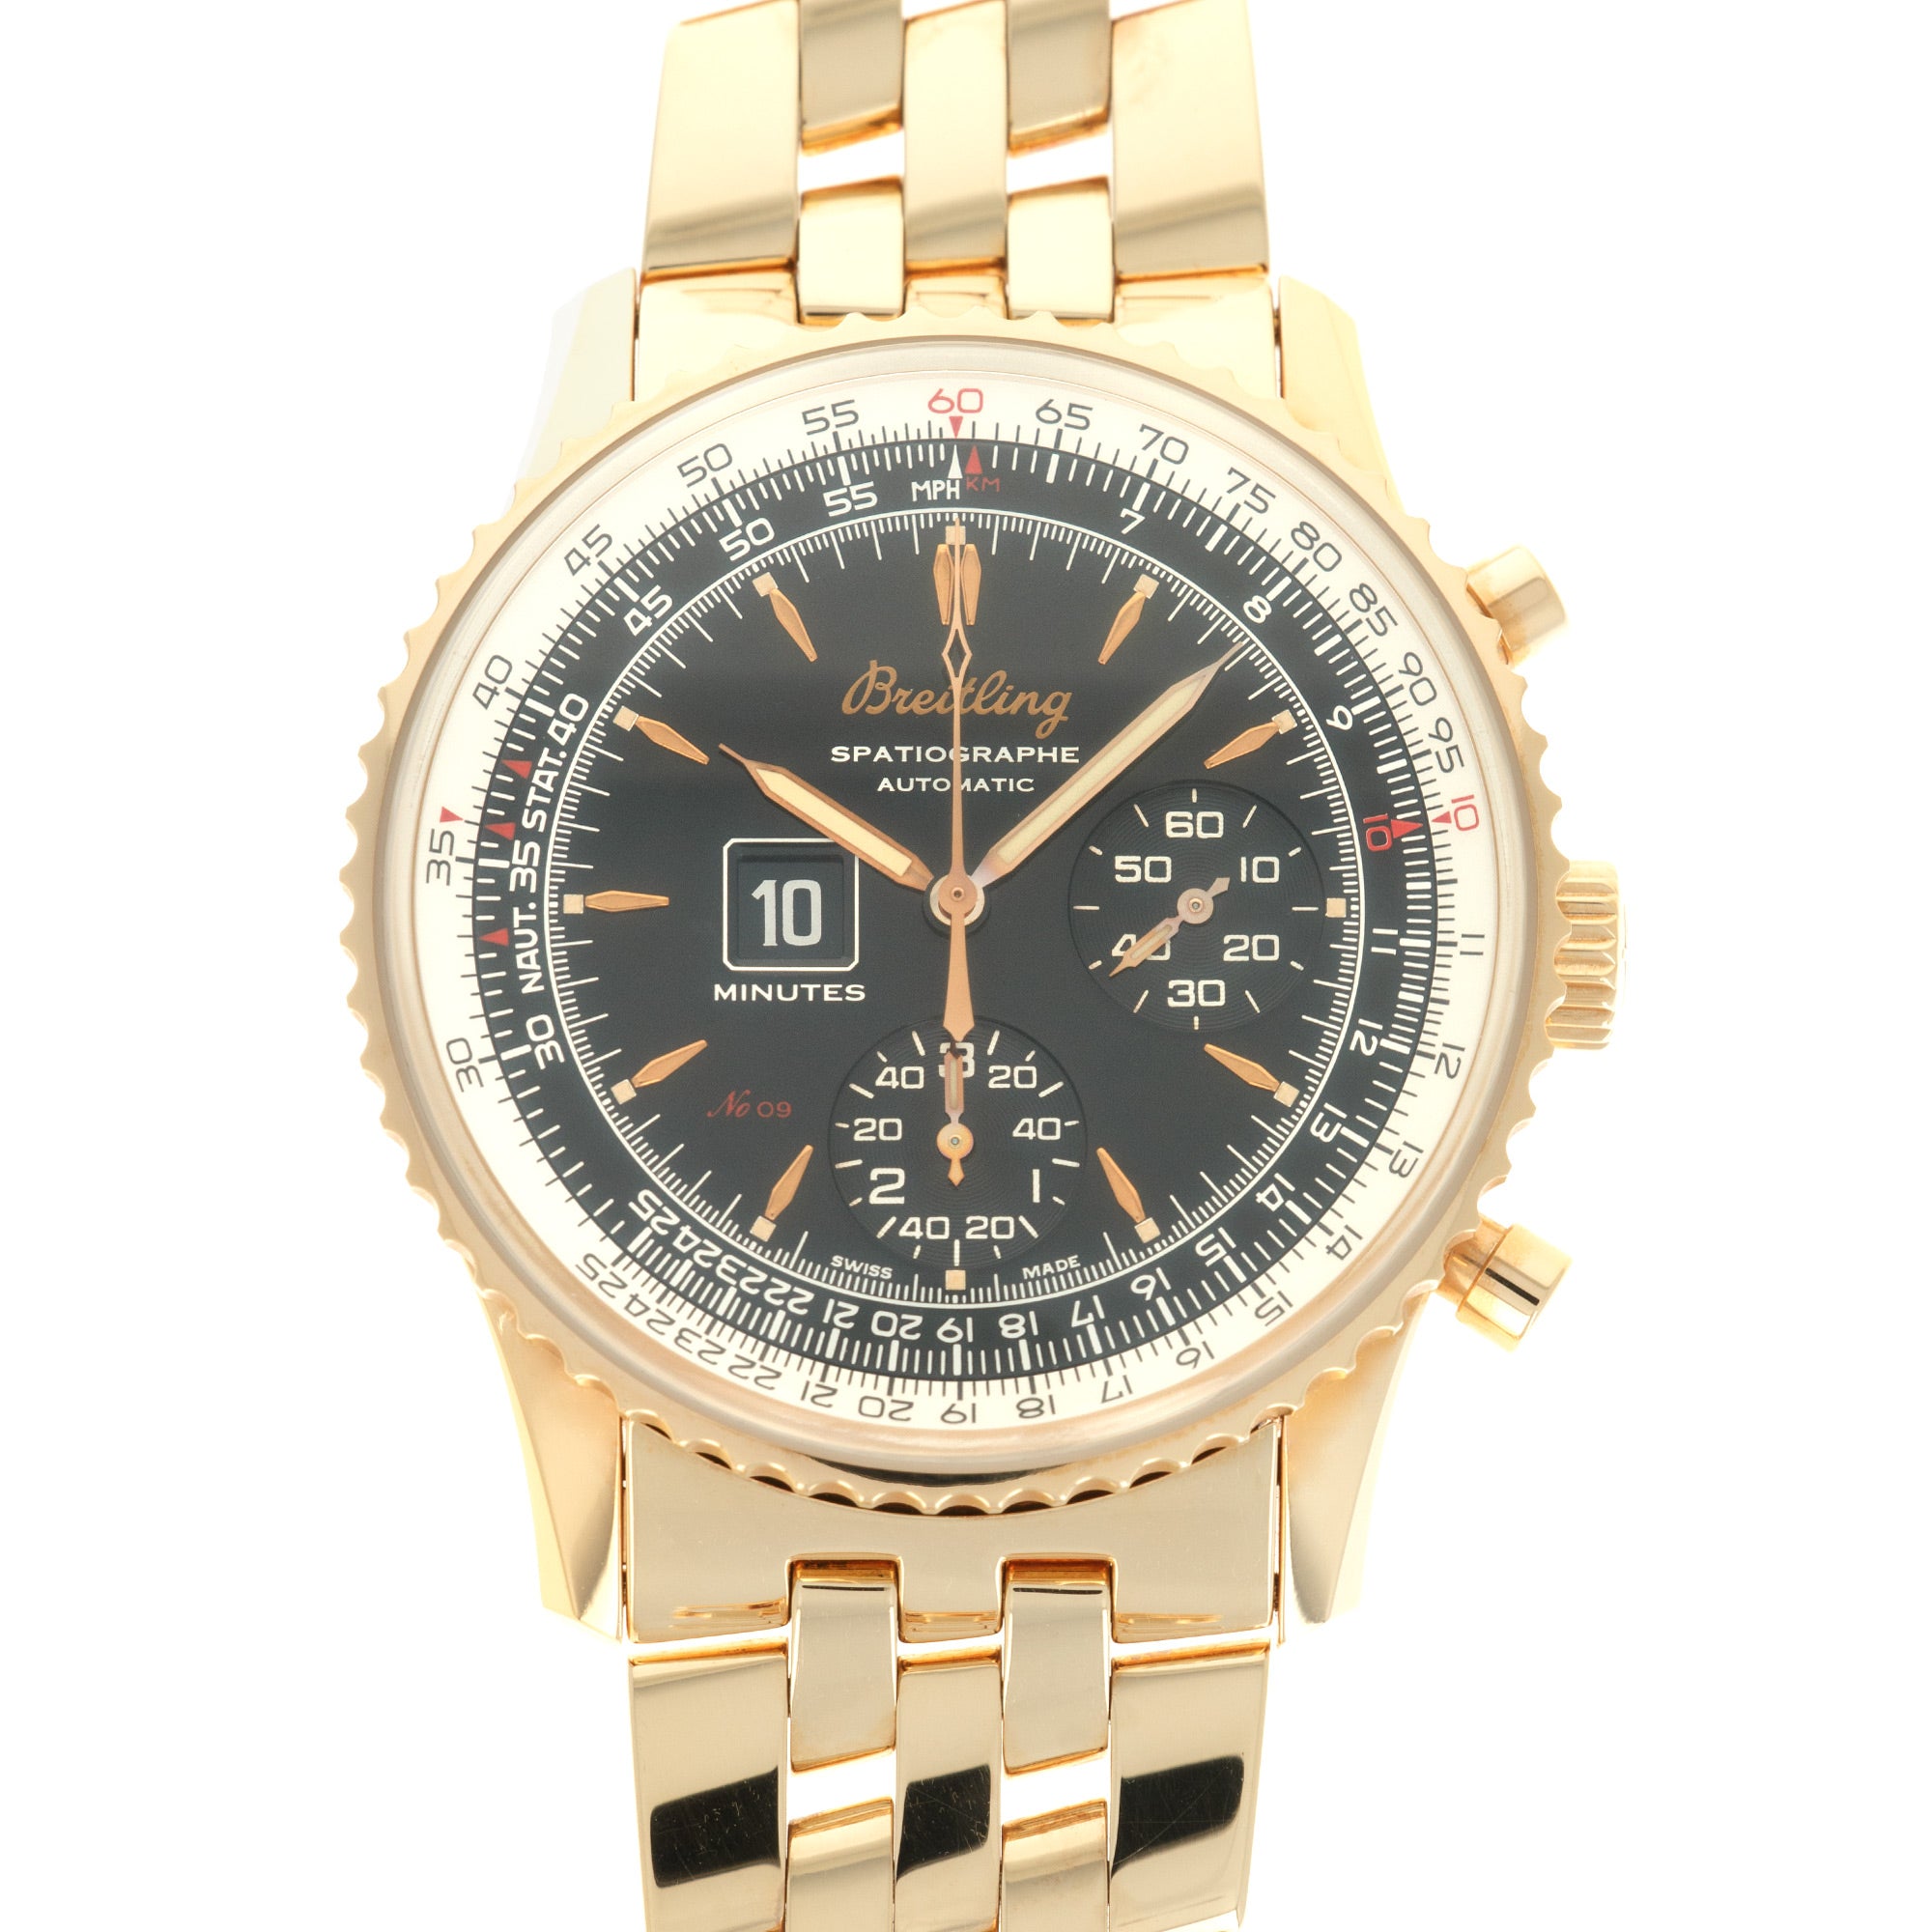 Breitling - Breitling Yellow Gold Montbrilliant Spatiographe Watch - The Keystone Watches